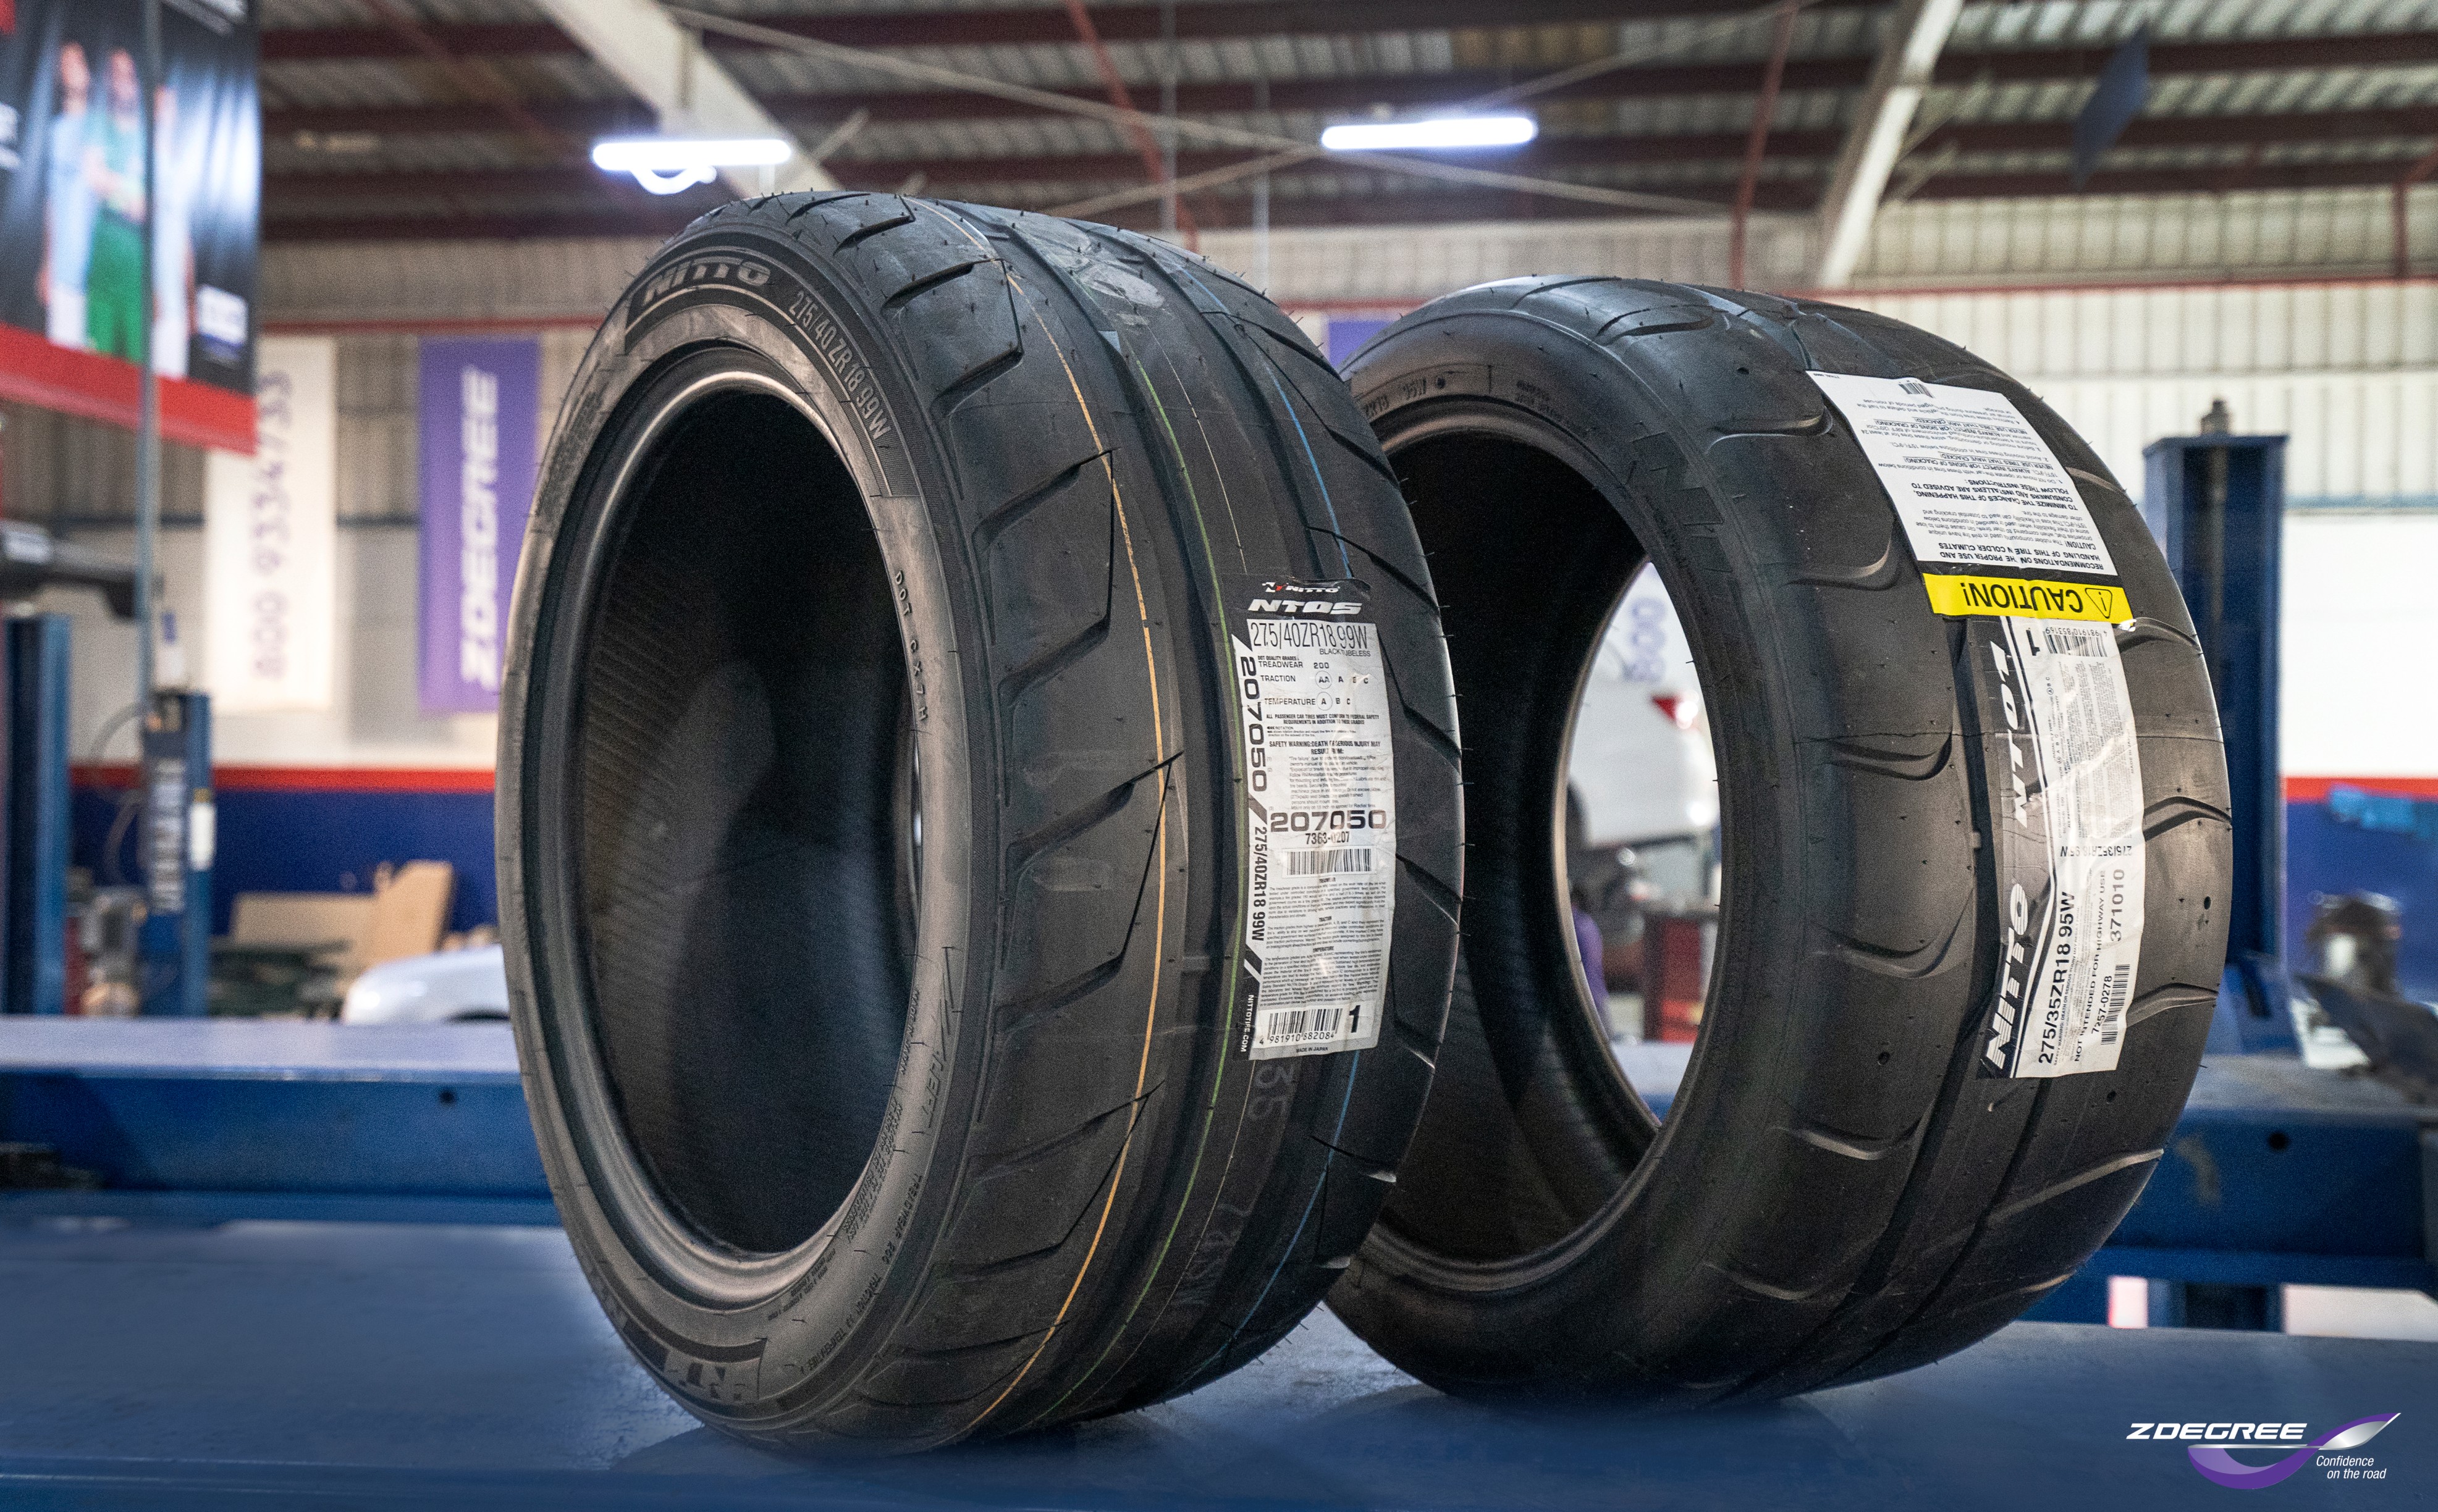 8 answers to the most frequently asked question about Nitto tires!